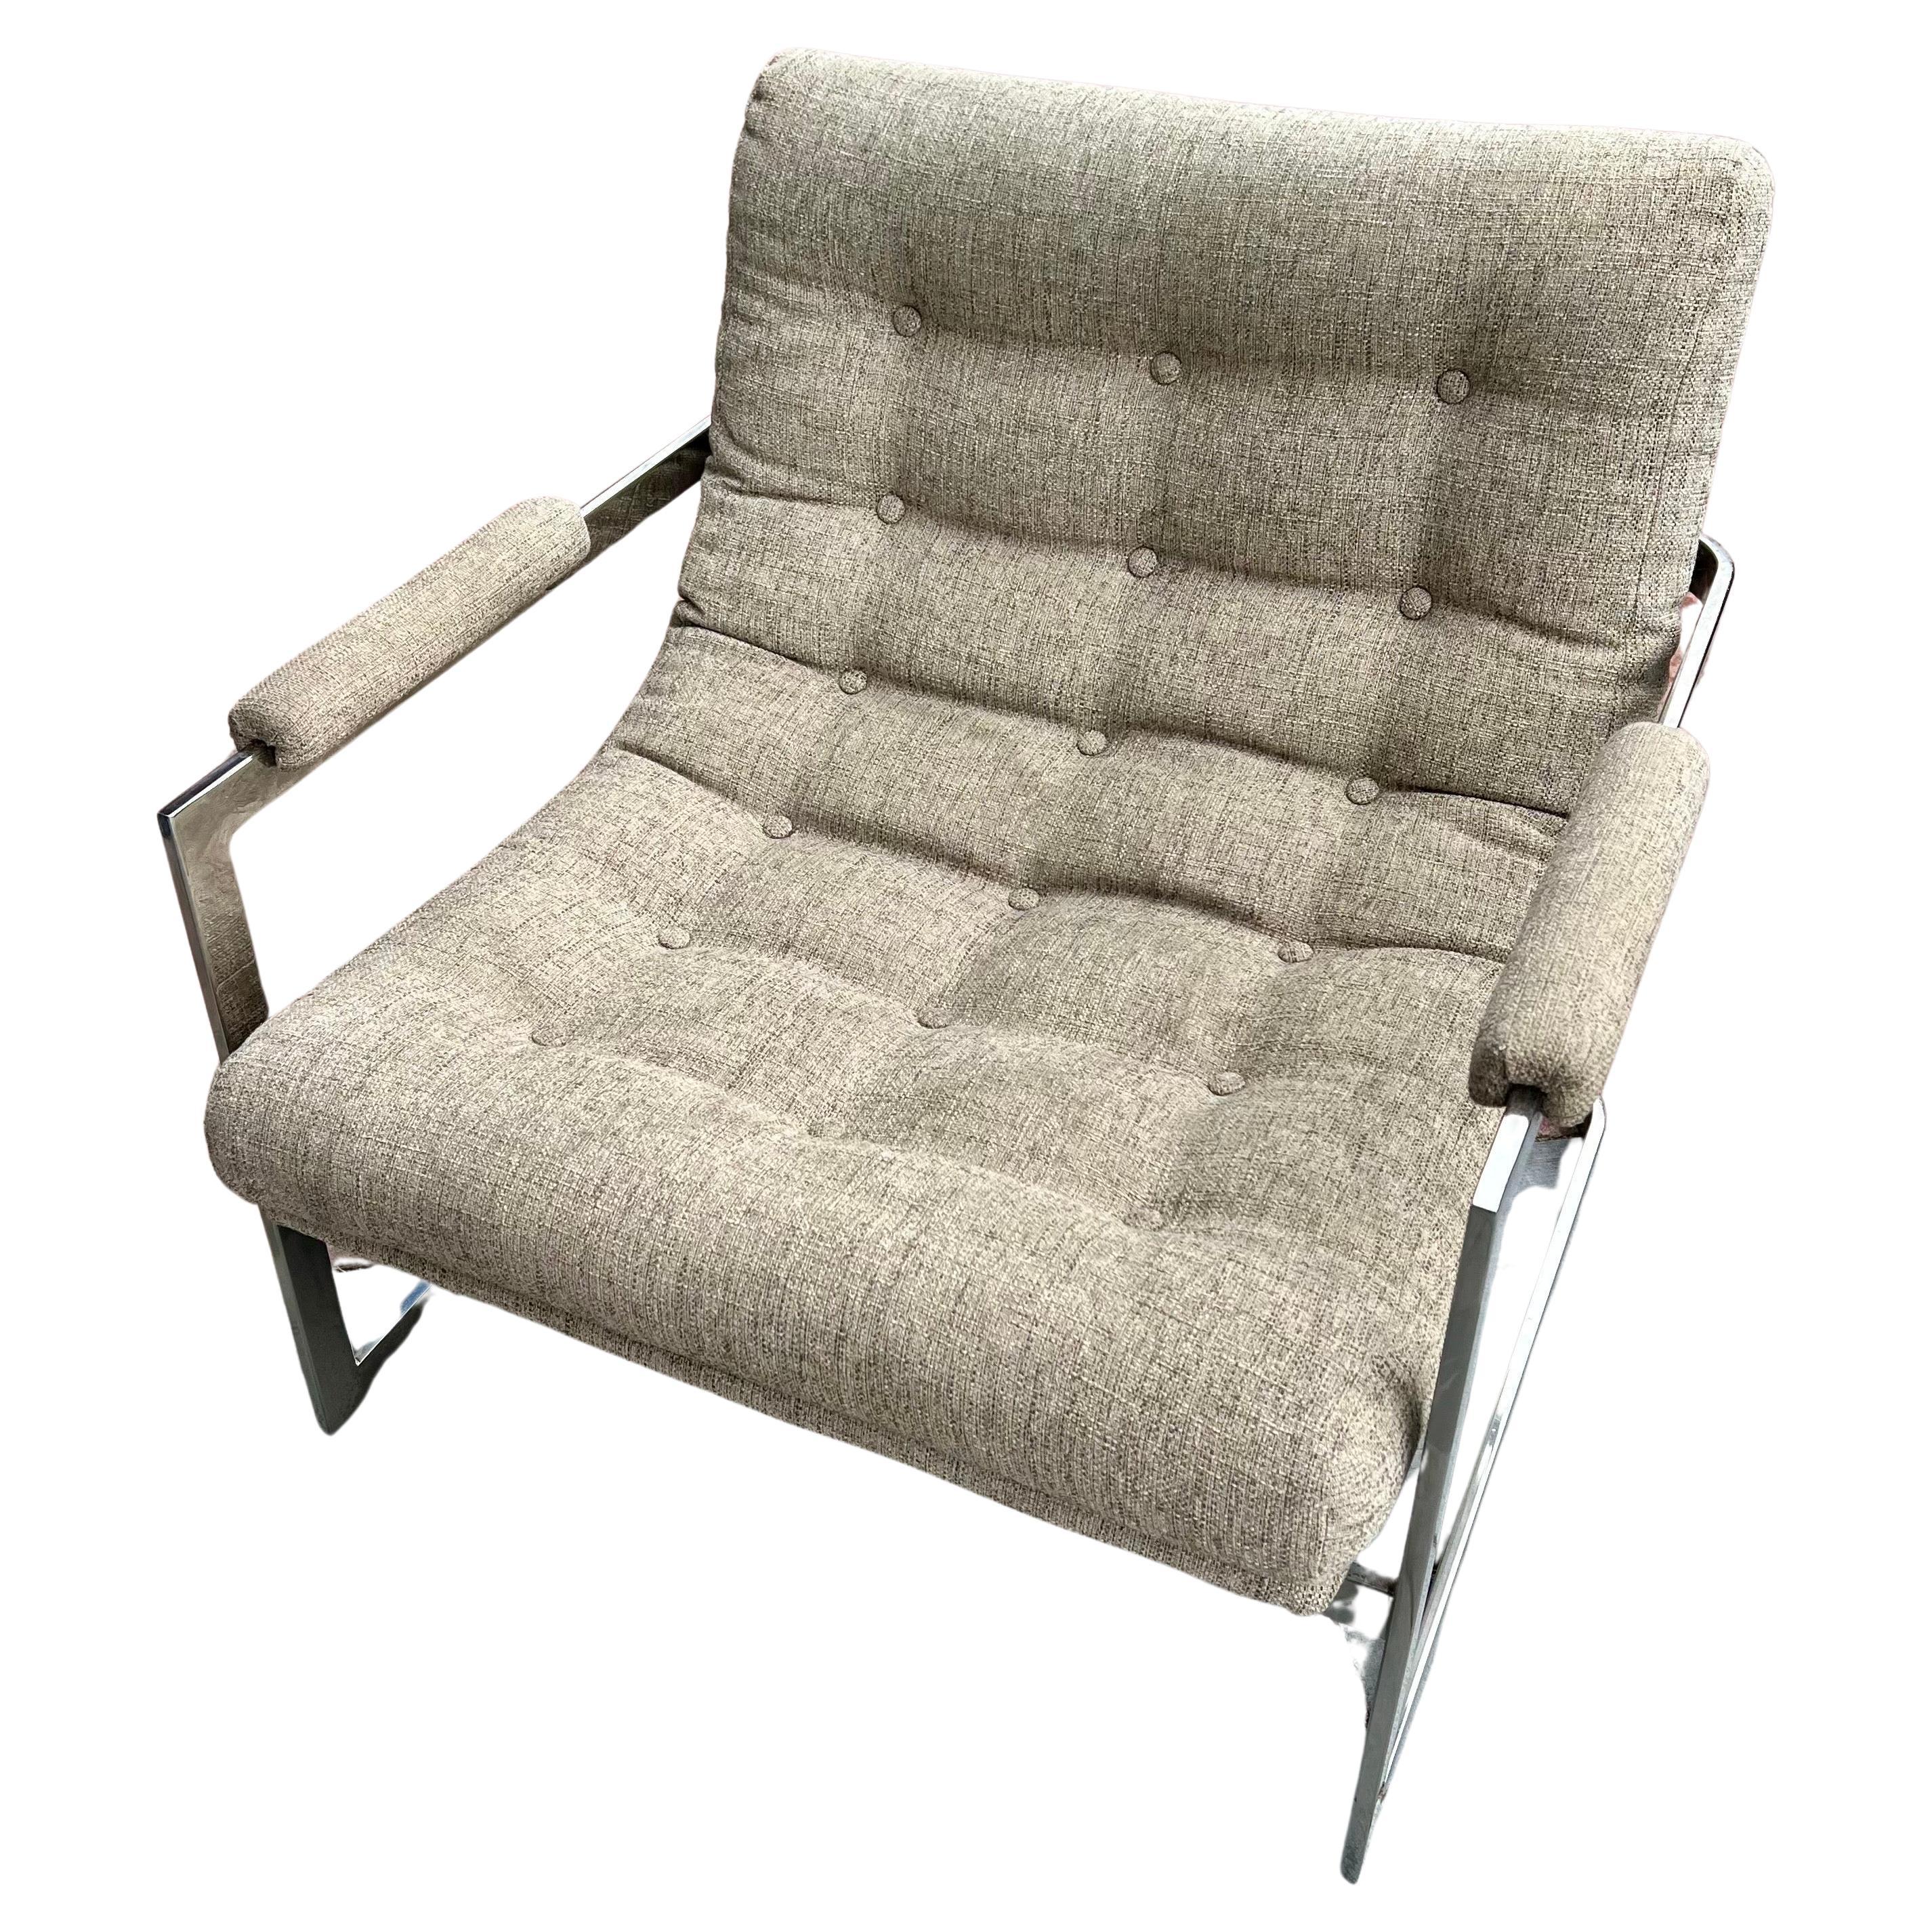 **Vintage Milo Baughman Lounge Chair, Circa 1970 - Upholstered in Knoll Fabric**

Experience the timeless elegance of mid-century design with this exquisite lounge armchair by the renowned Milo Baughman, circa 1970. The chair boasts a sleek,